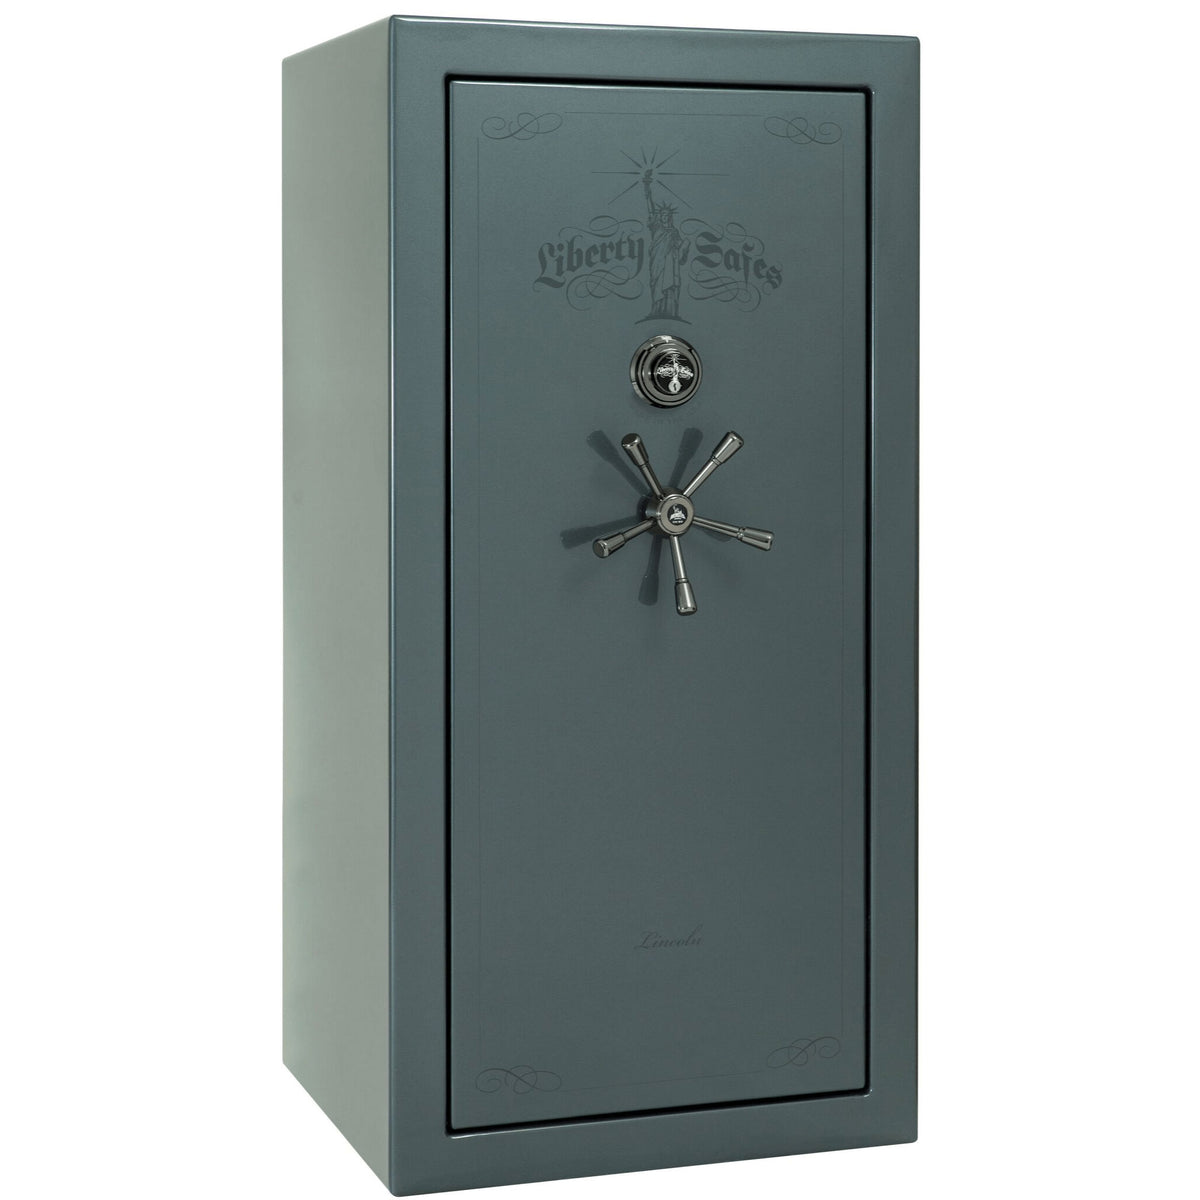 Liberty Lincoln 25 Safe in Forest Mist Gloss with Black Chrome Mechanical Lock.